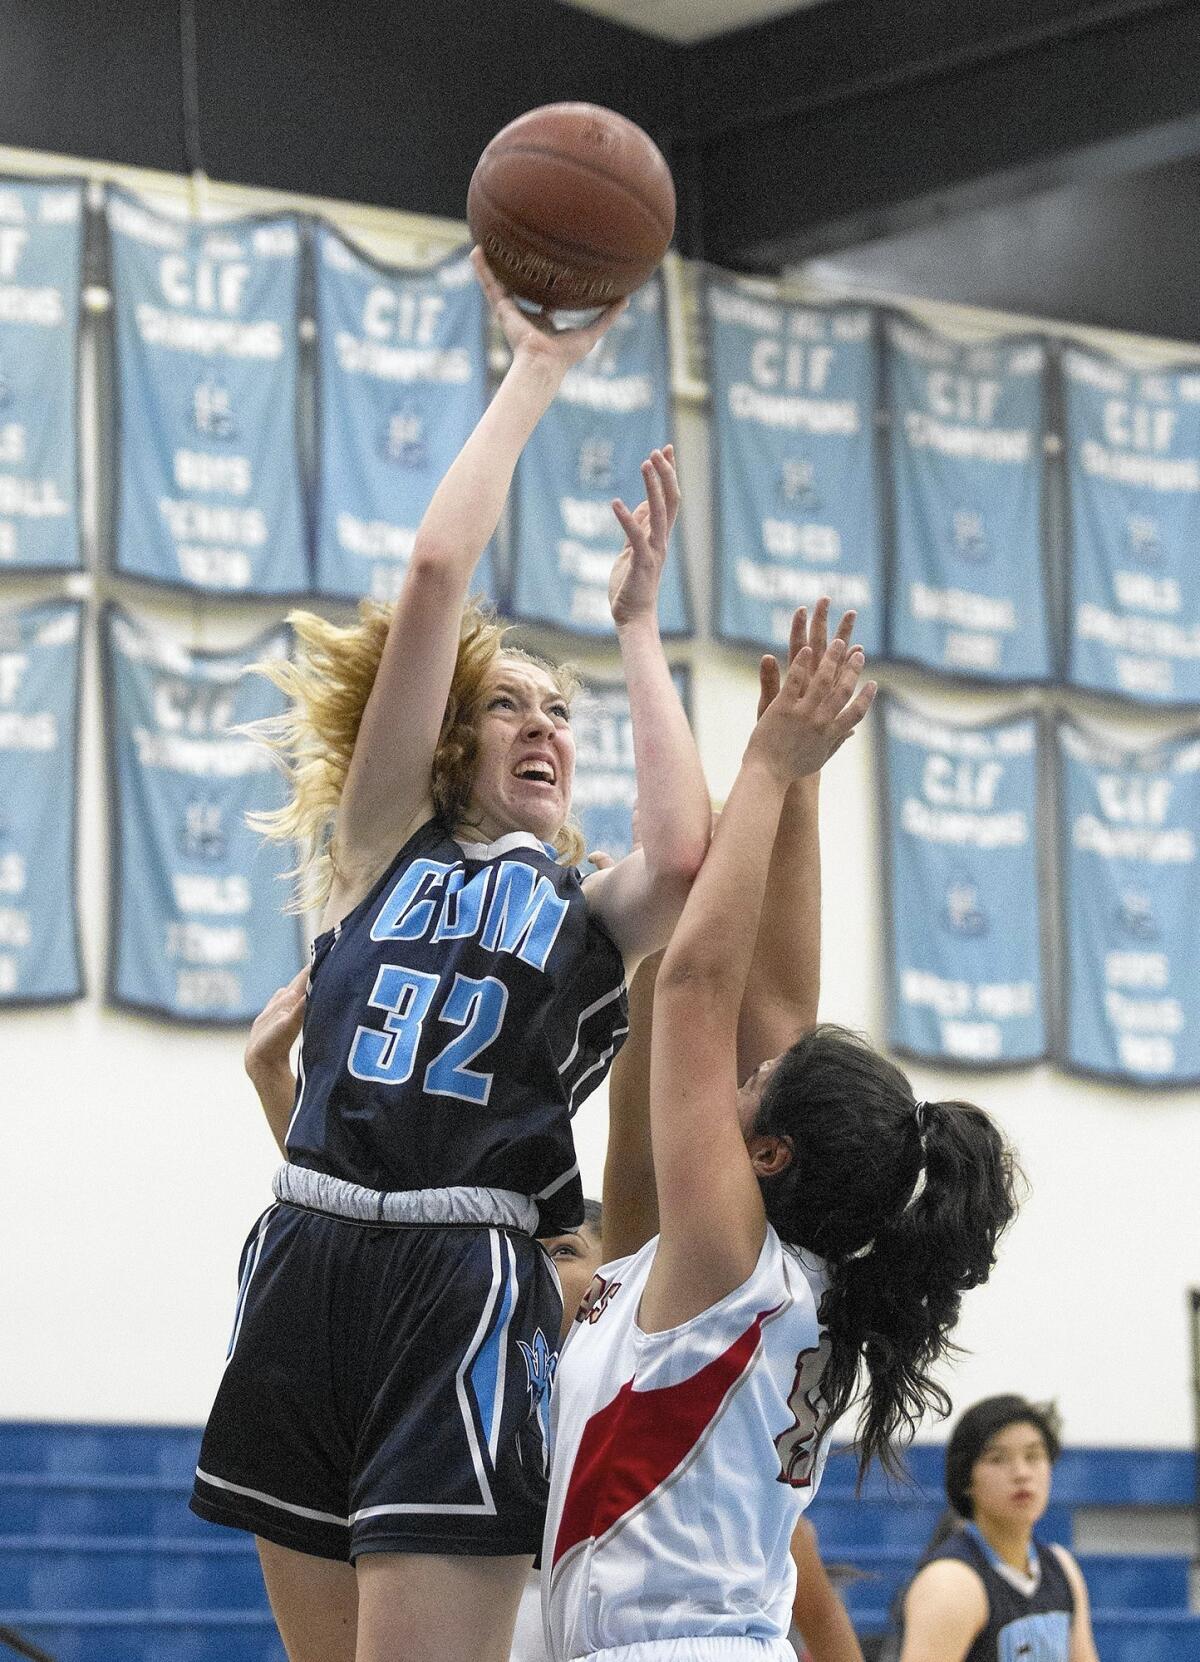 Corona del Mar High's Natalia Bruening (32) scored 12 points against Segerstrom in the CdM Tip-Off Tournament semifinals on Friday.